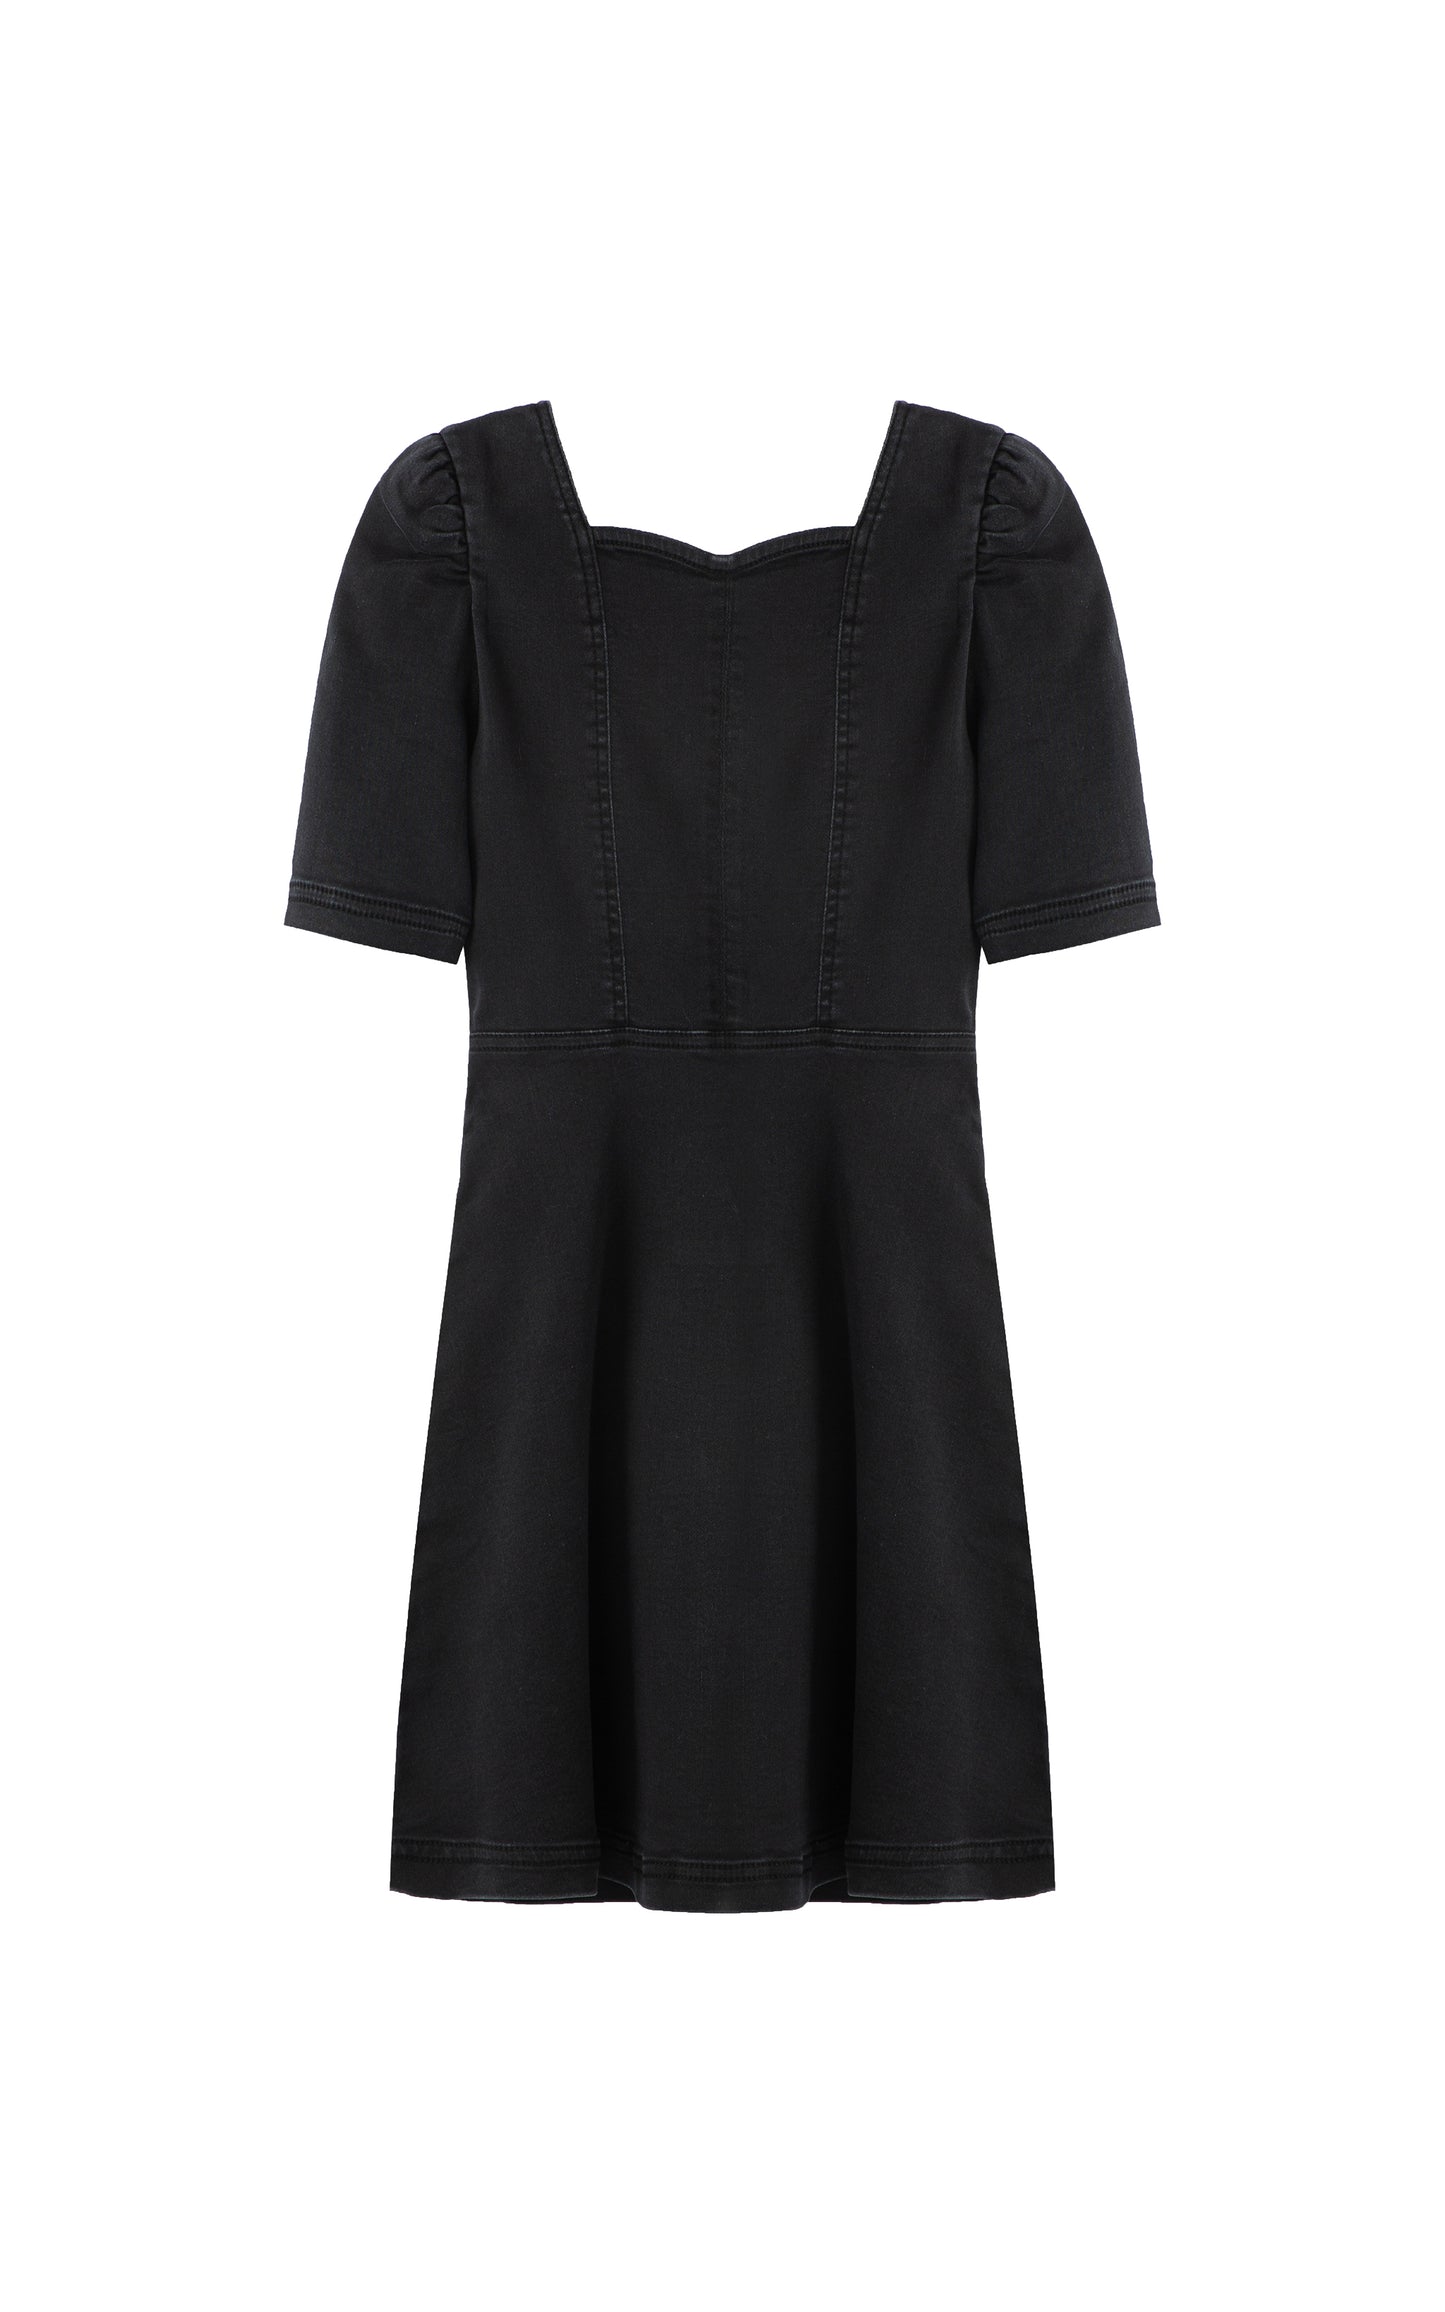 Front view of black denim dress with a sweetheart neckline 